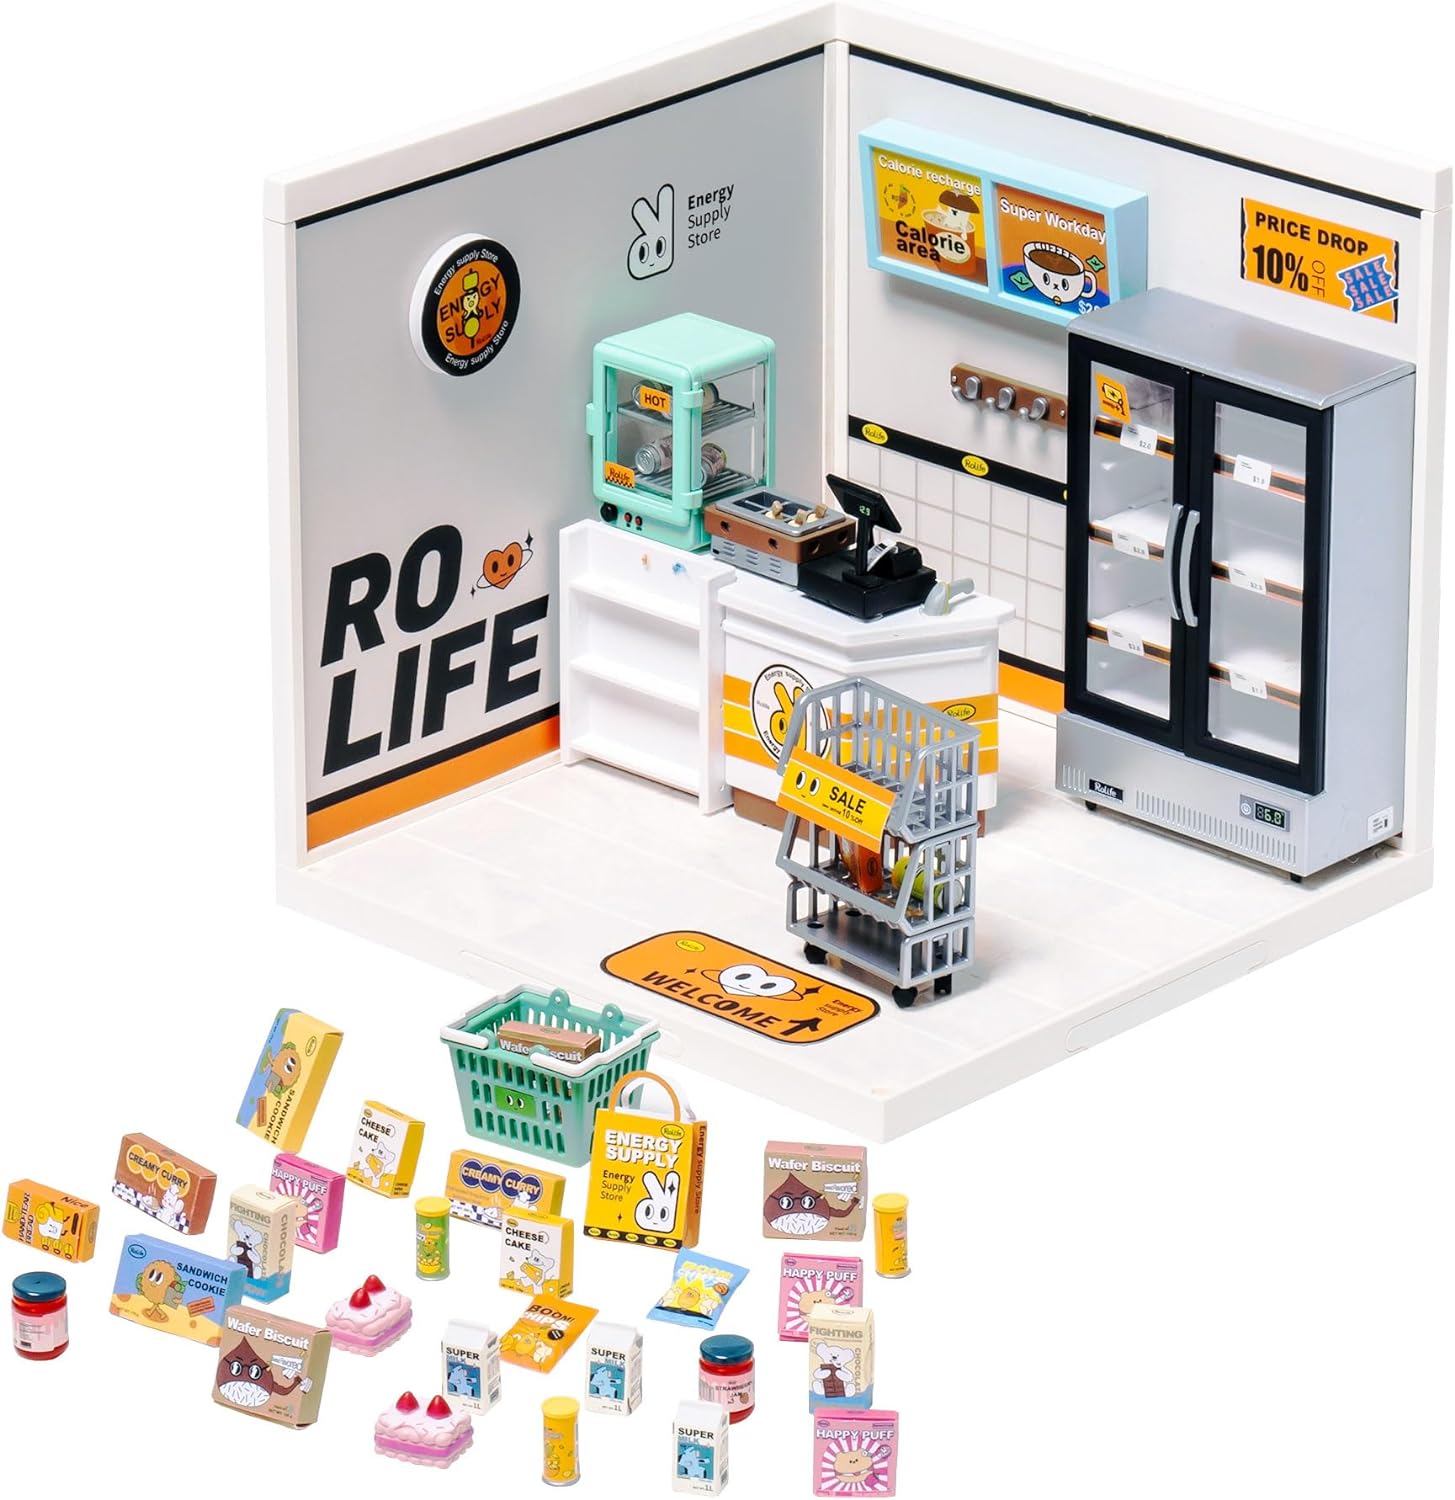 Rolife Plastic House Building Set Toy DIY Miniature Dollhouse Playset with LED for Mini Figures Construction Toys Diorama Kit Gifts for Teens Adults